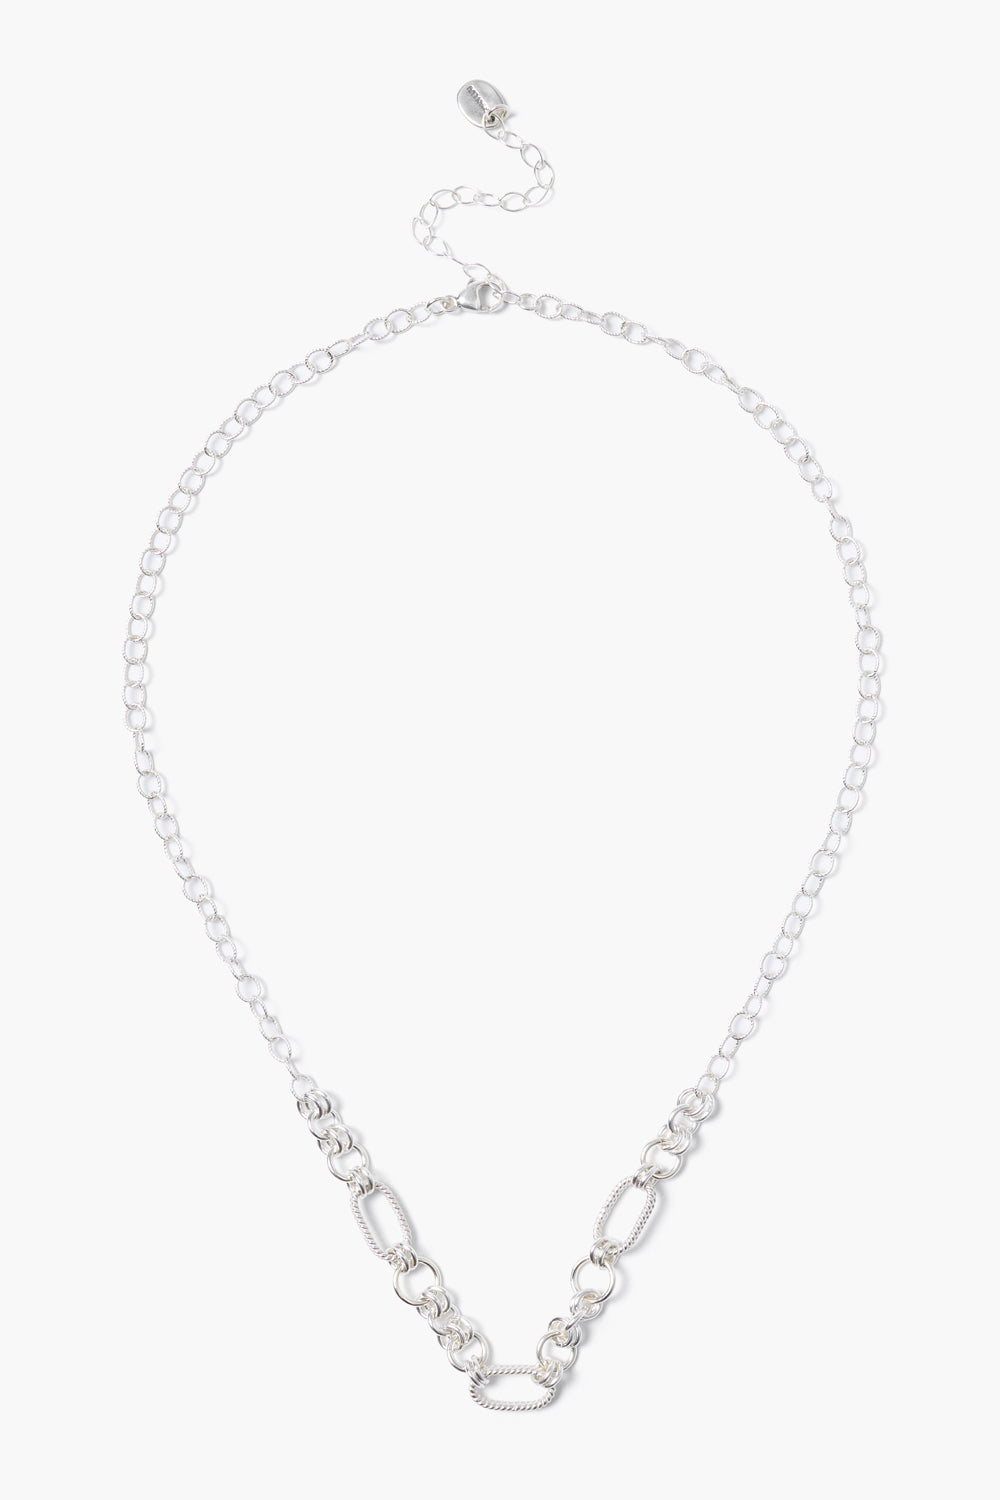 SILVER TEXTURED LINKS NECKLACE - Kingfisher Road - Online Boutique